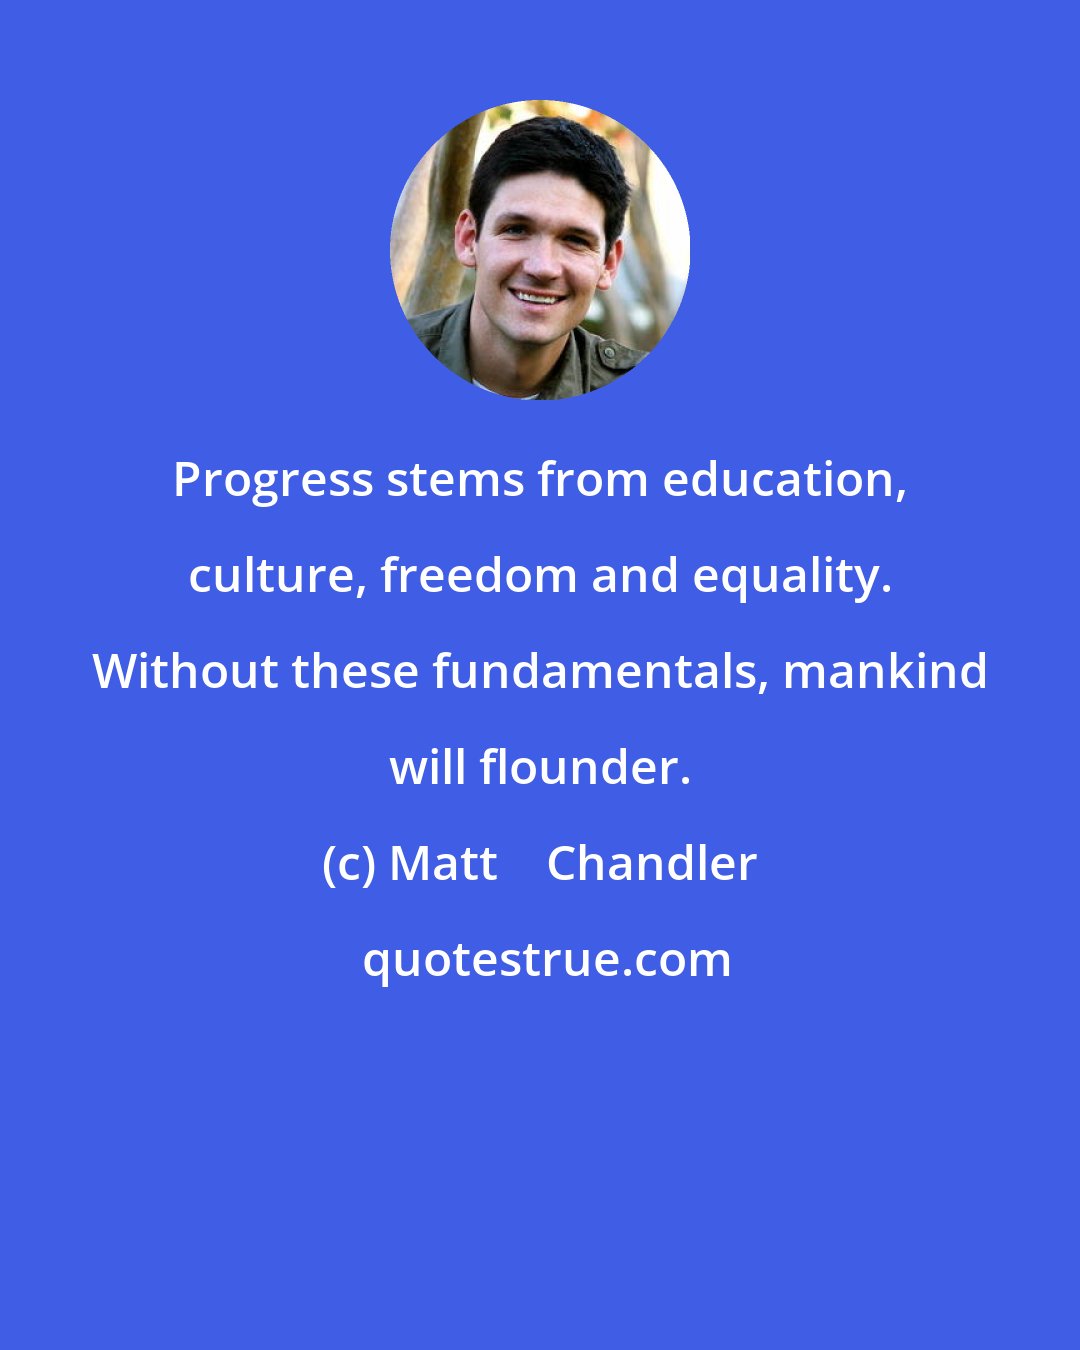 Matt    Chandler: Progress stems from education, culture, freedom and equality. Without these fundamentals, mankind will flounder.